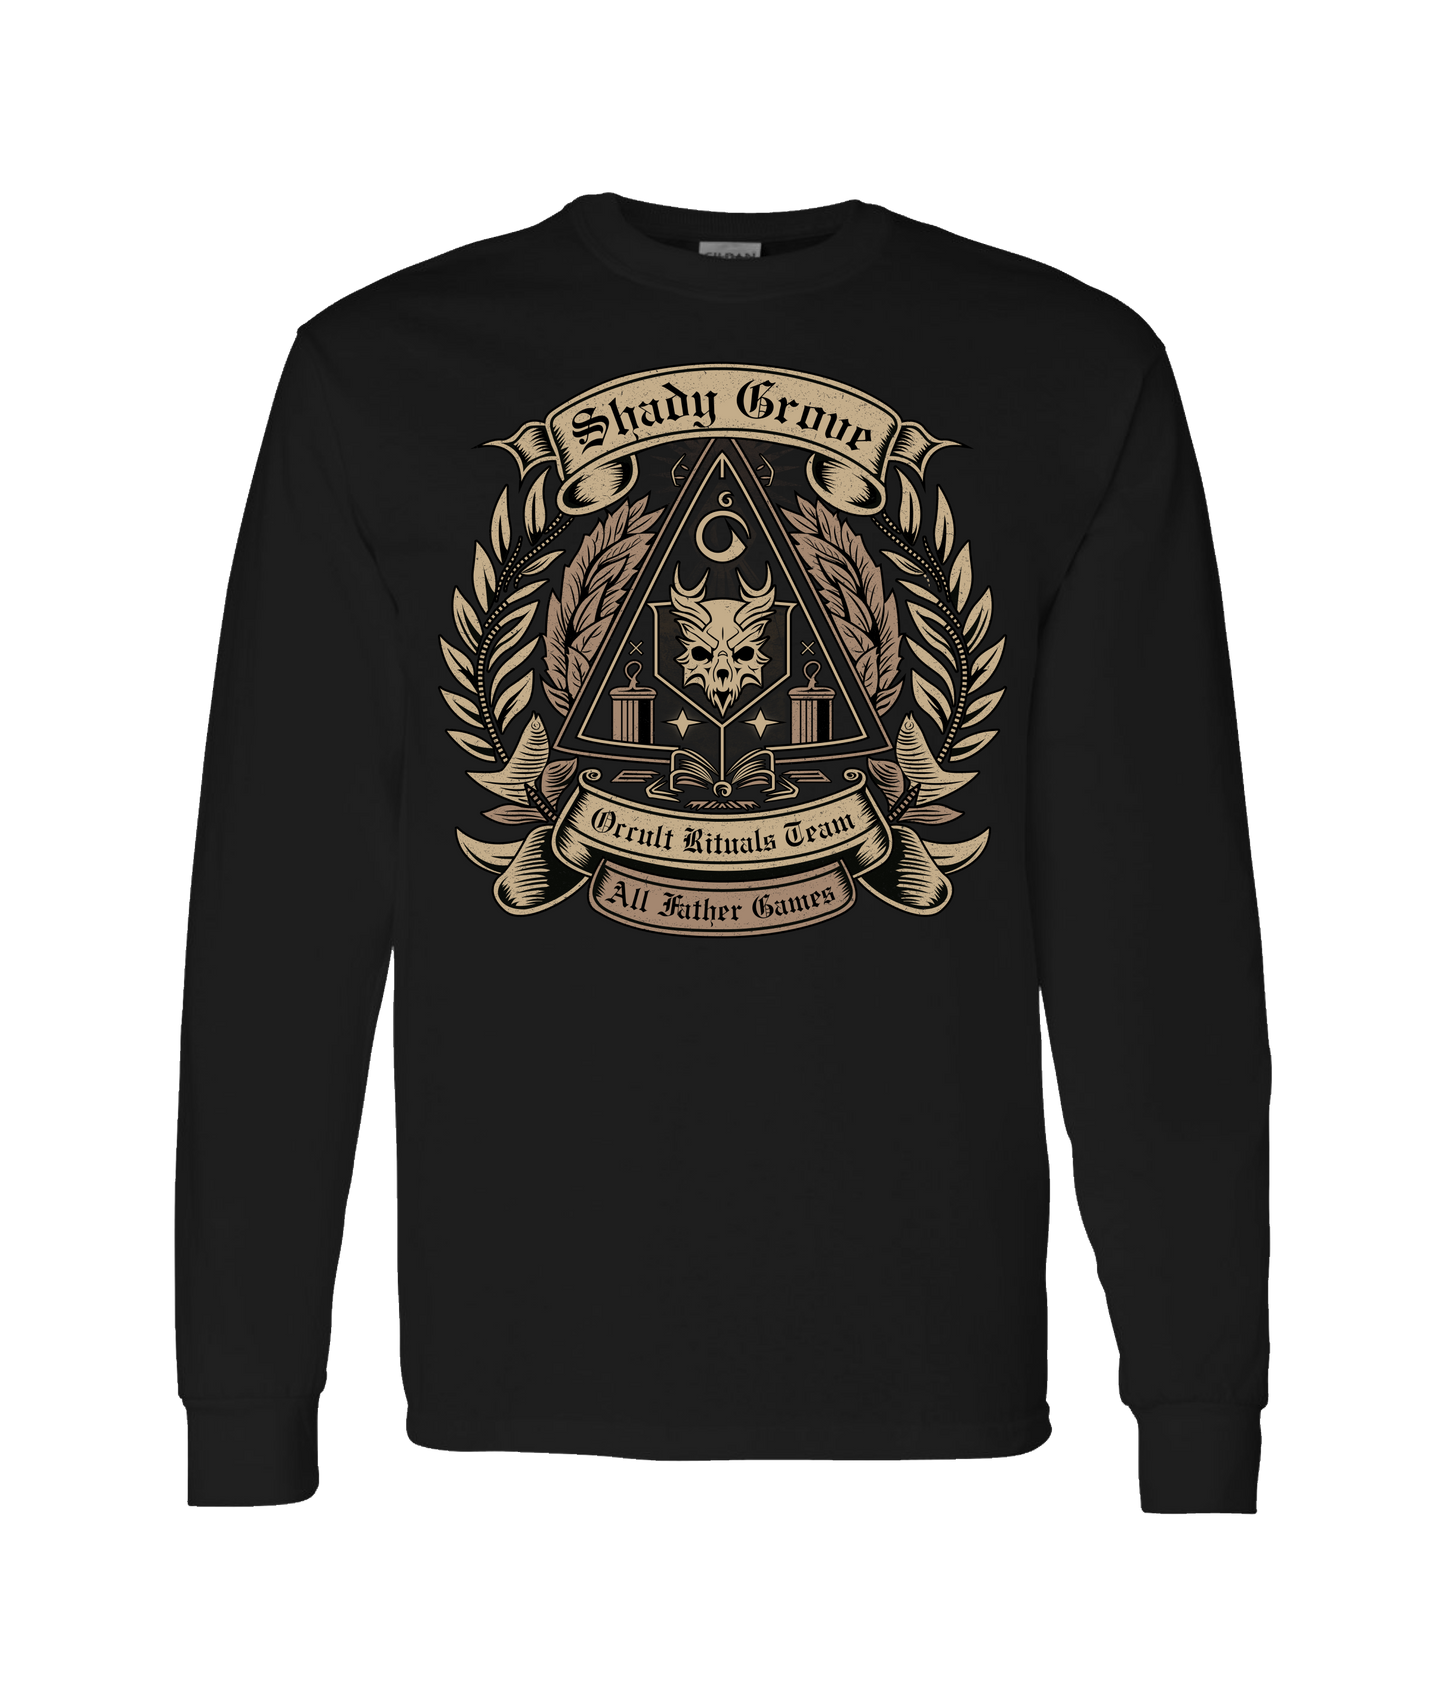 All Father Games - SHADY GROVE - Black Long Sleeve T